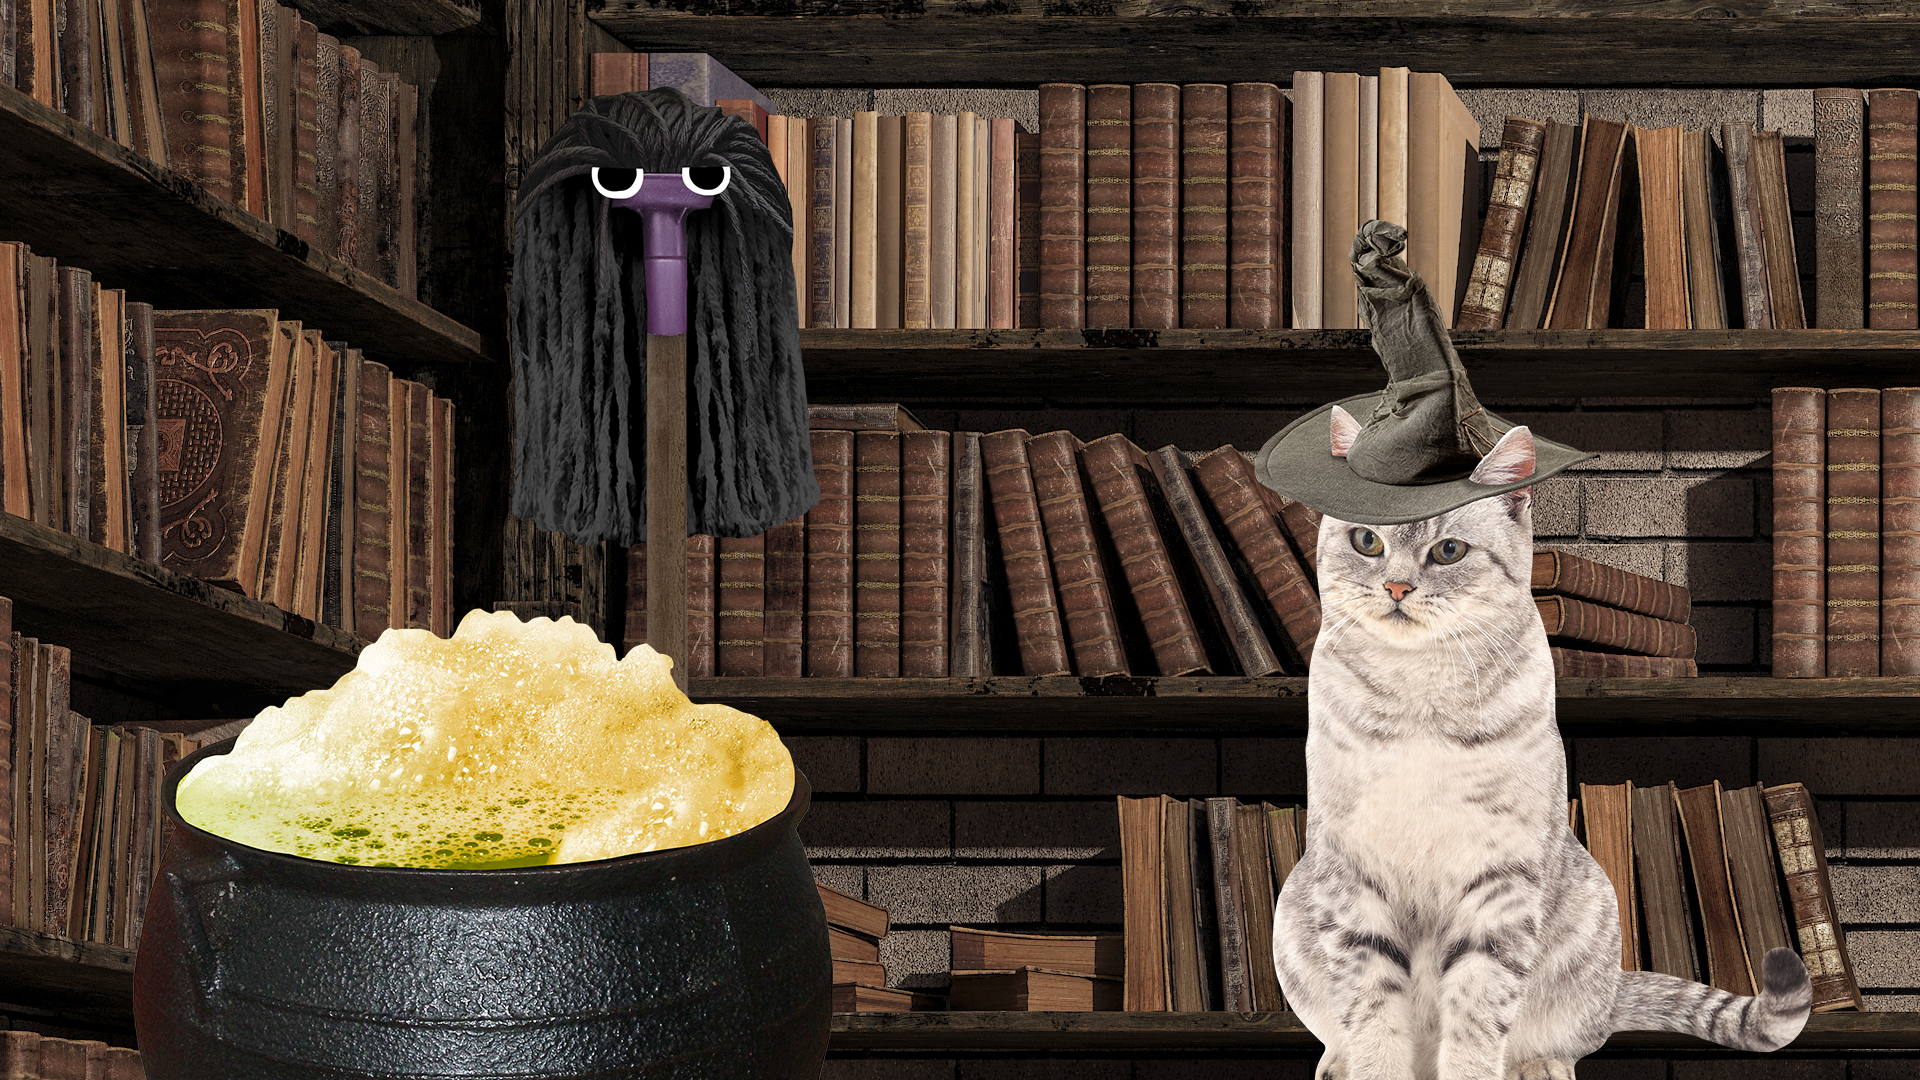 Snape and McGonagall in a library room with a bubbling cauldron